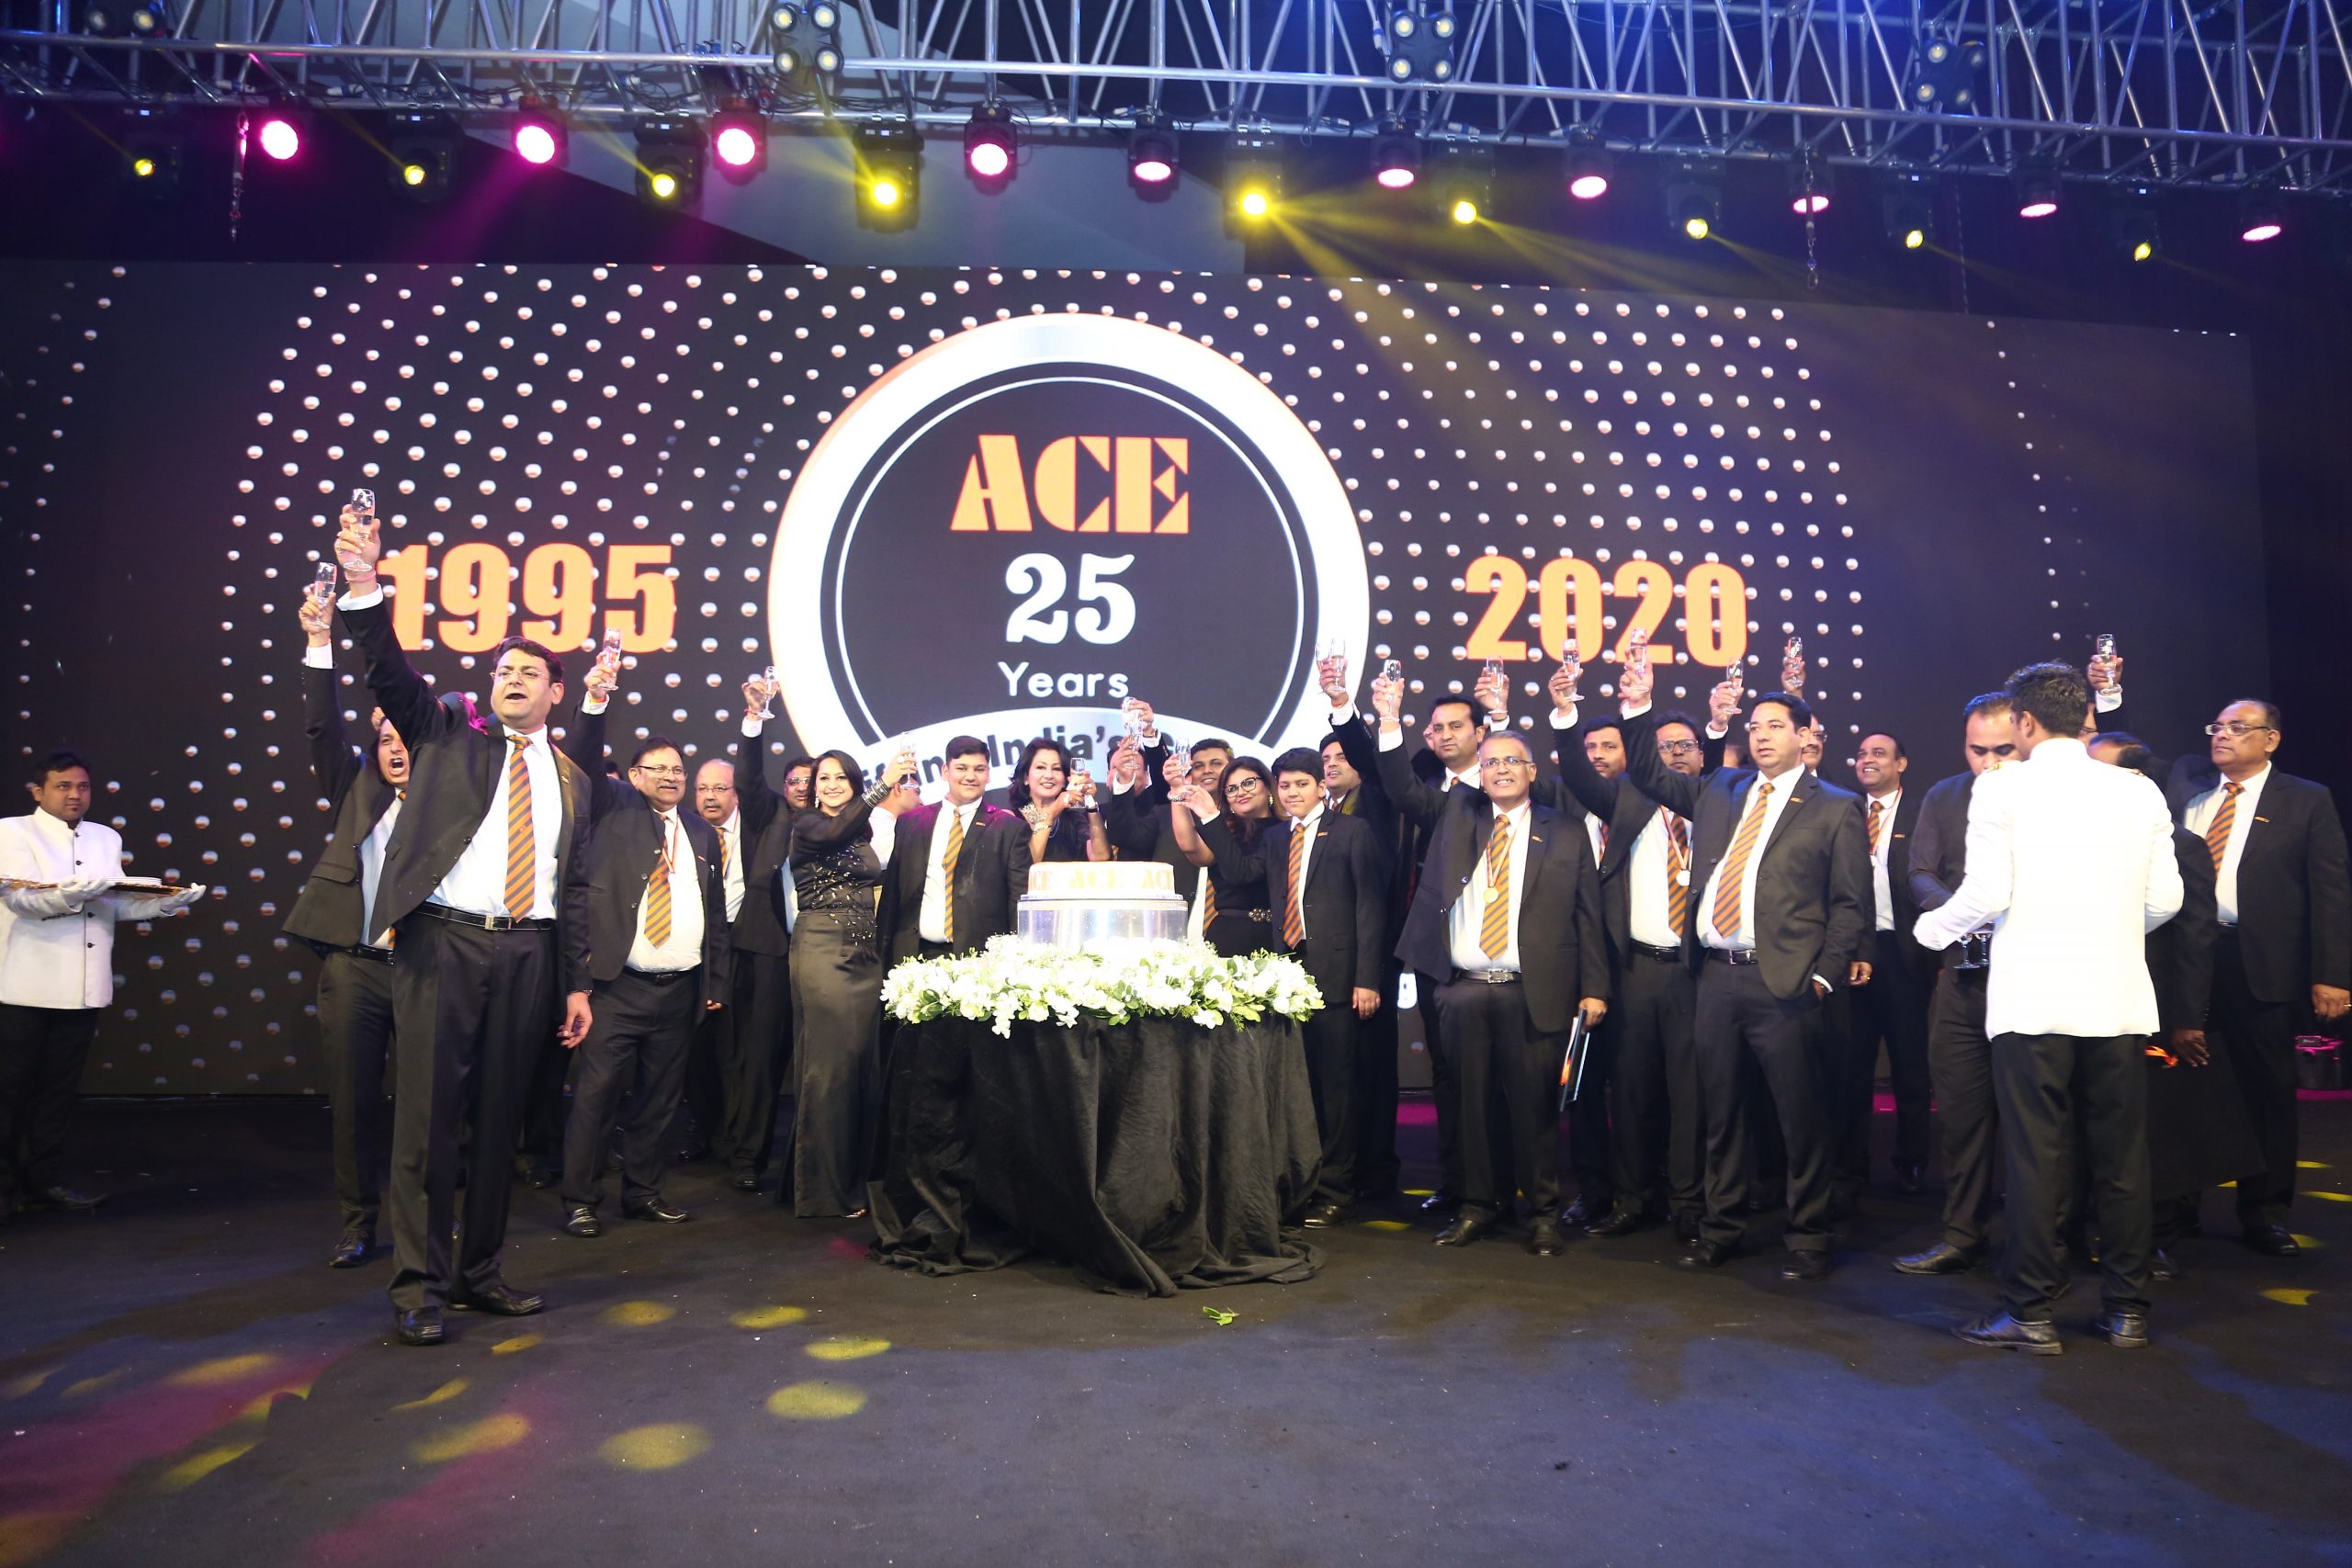 ACE- India’s No. 1 Crane Brand celebrates 25 years of Lifting India’s Growth